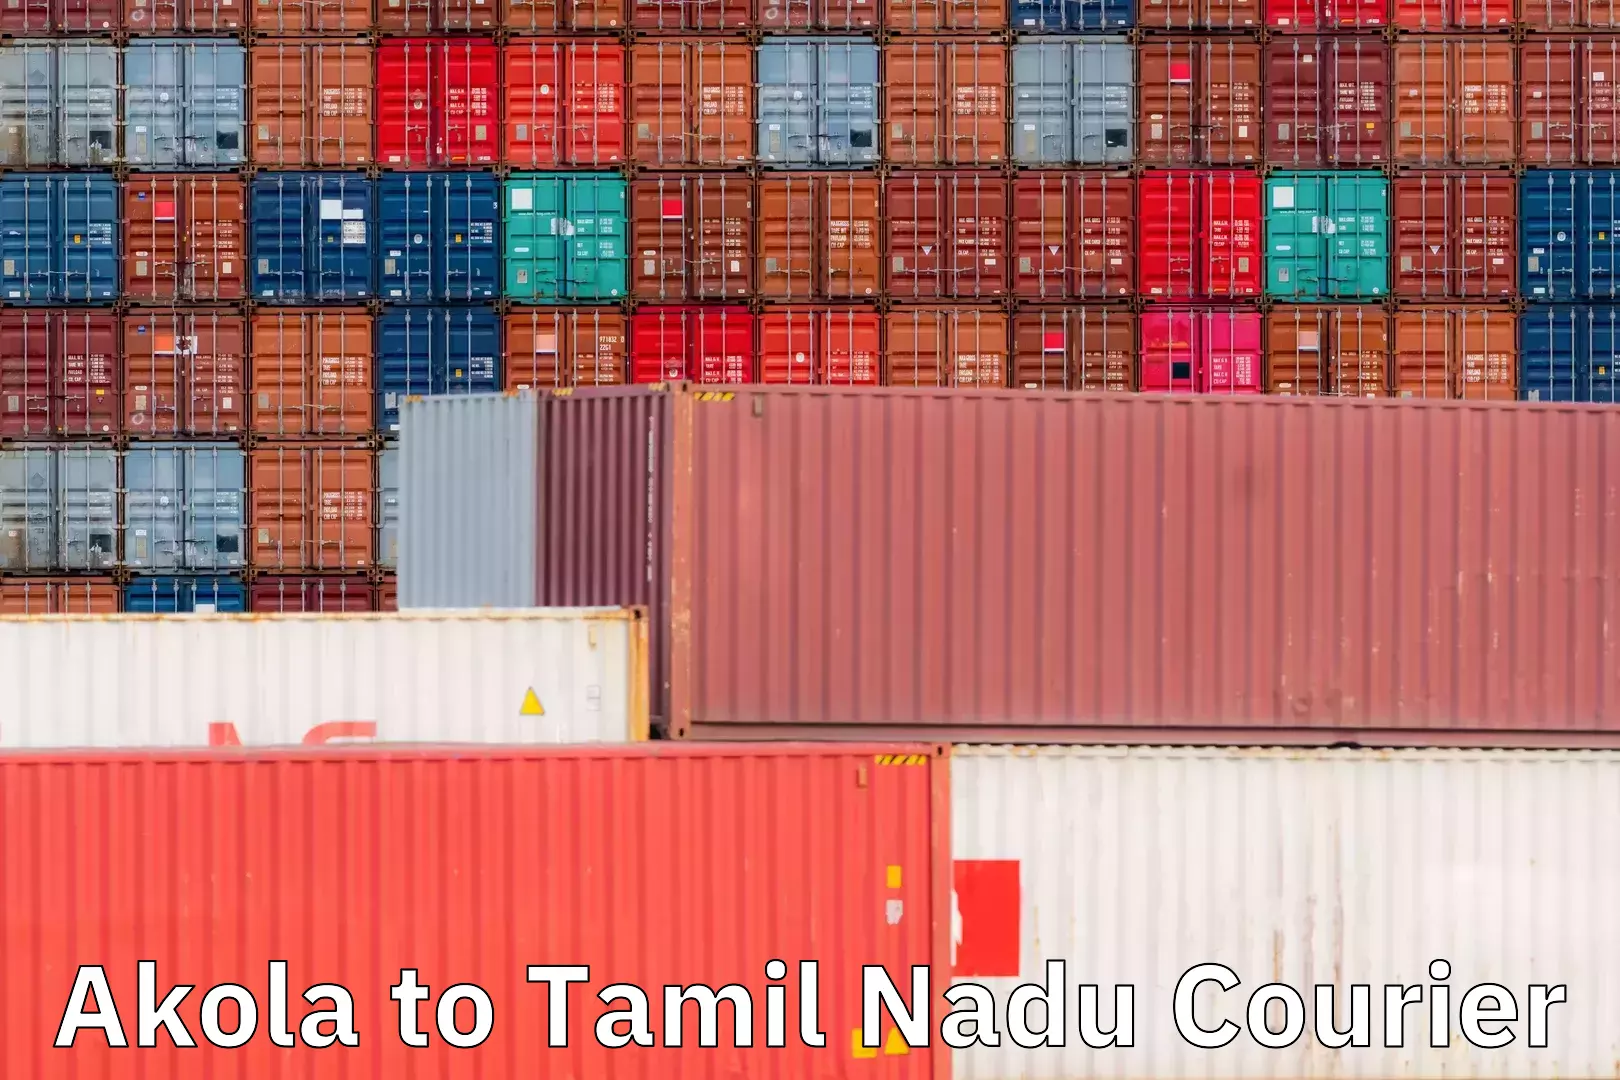 Sustainable shipping practices Akola to Tamil Nadu